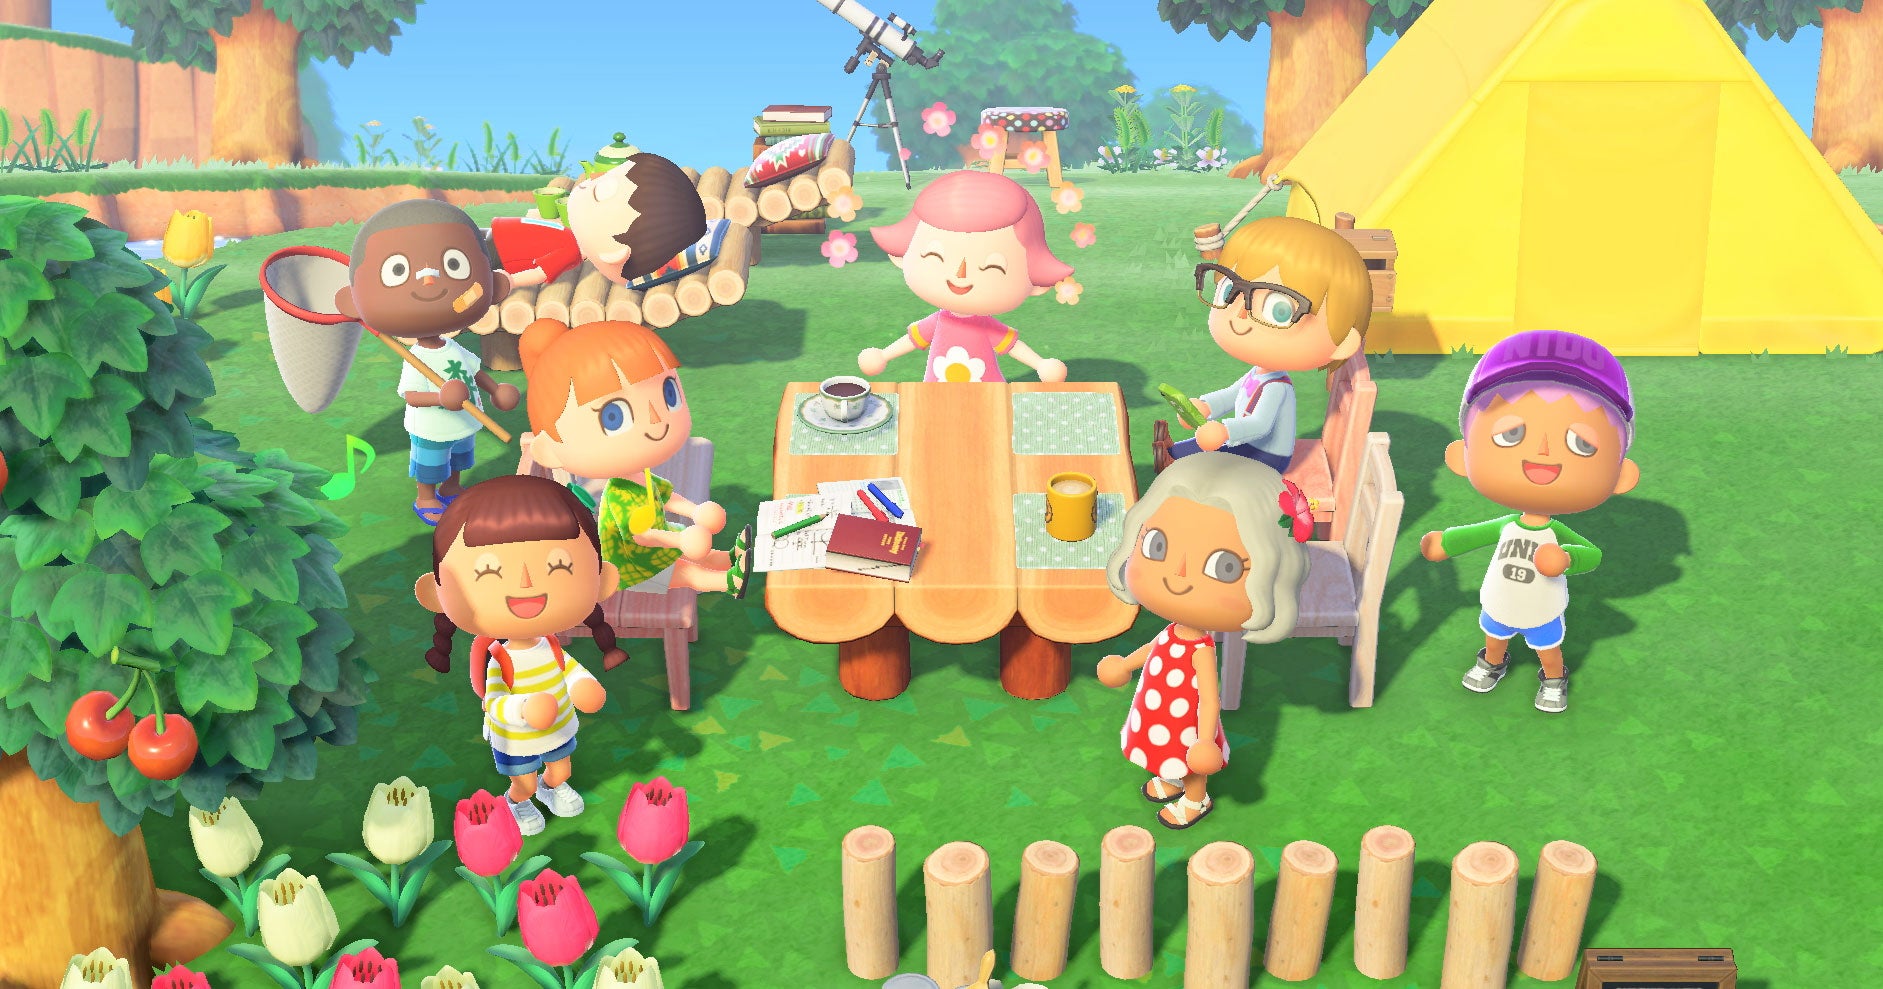 How Much Money Has Nintendo Made From Animal Crossing?